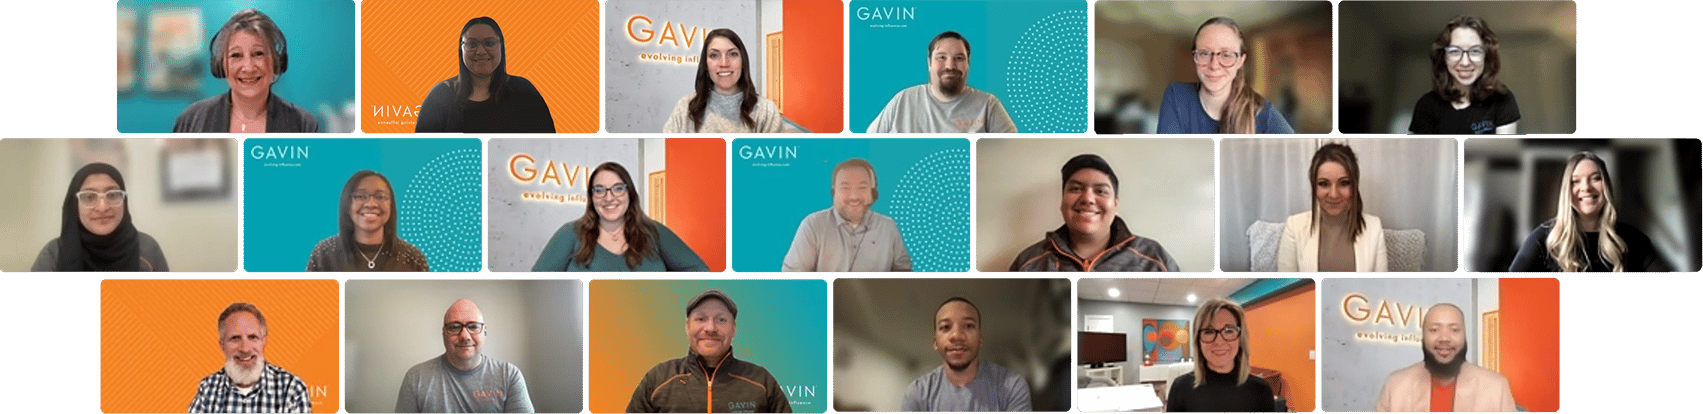 Header of Gavin team on their culture page